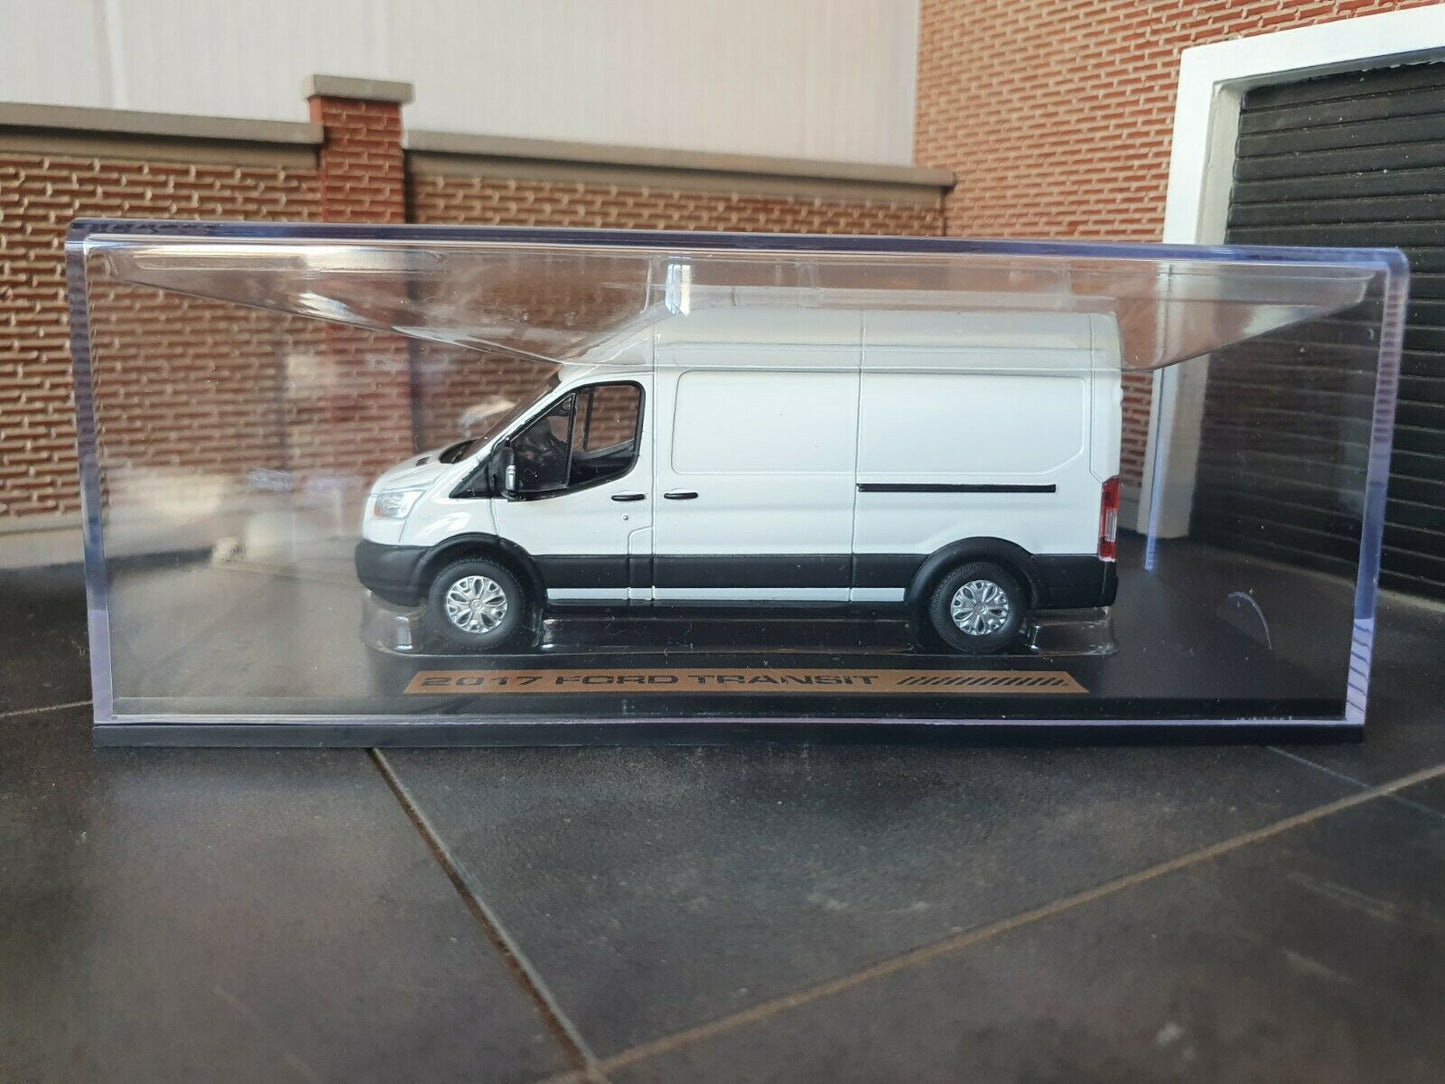 1:43 Ford Transit Mk8 White Van Oxford Greenlight Diecast 2017 HiTop Scale Model